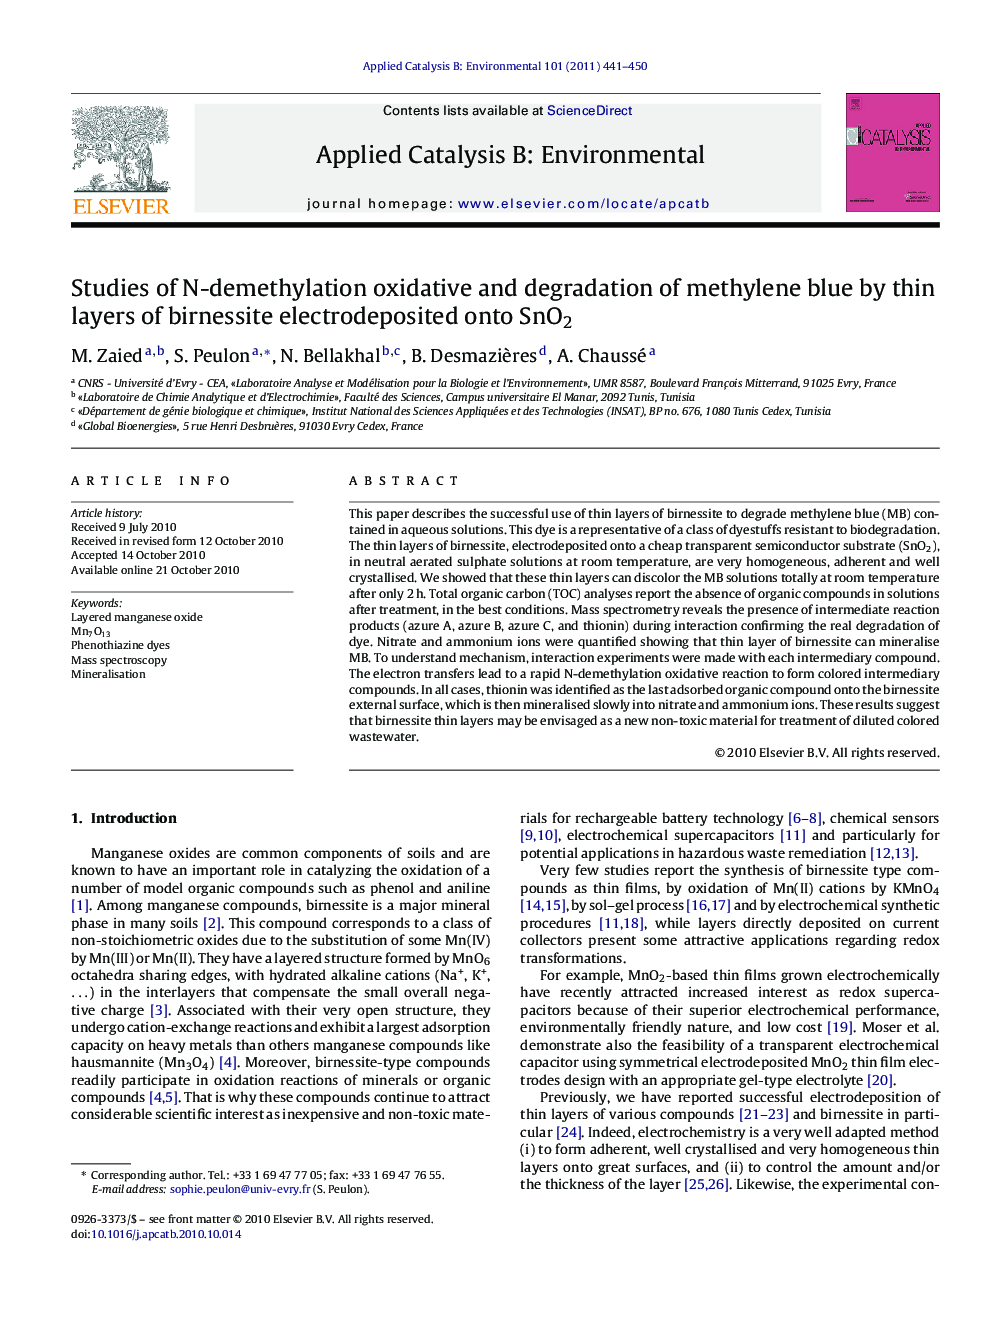 Studies of N-demethylation oxidative and degradation of methylene blue by thin layers of birnessite electrodeposited onto SnO2